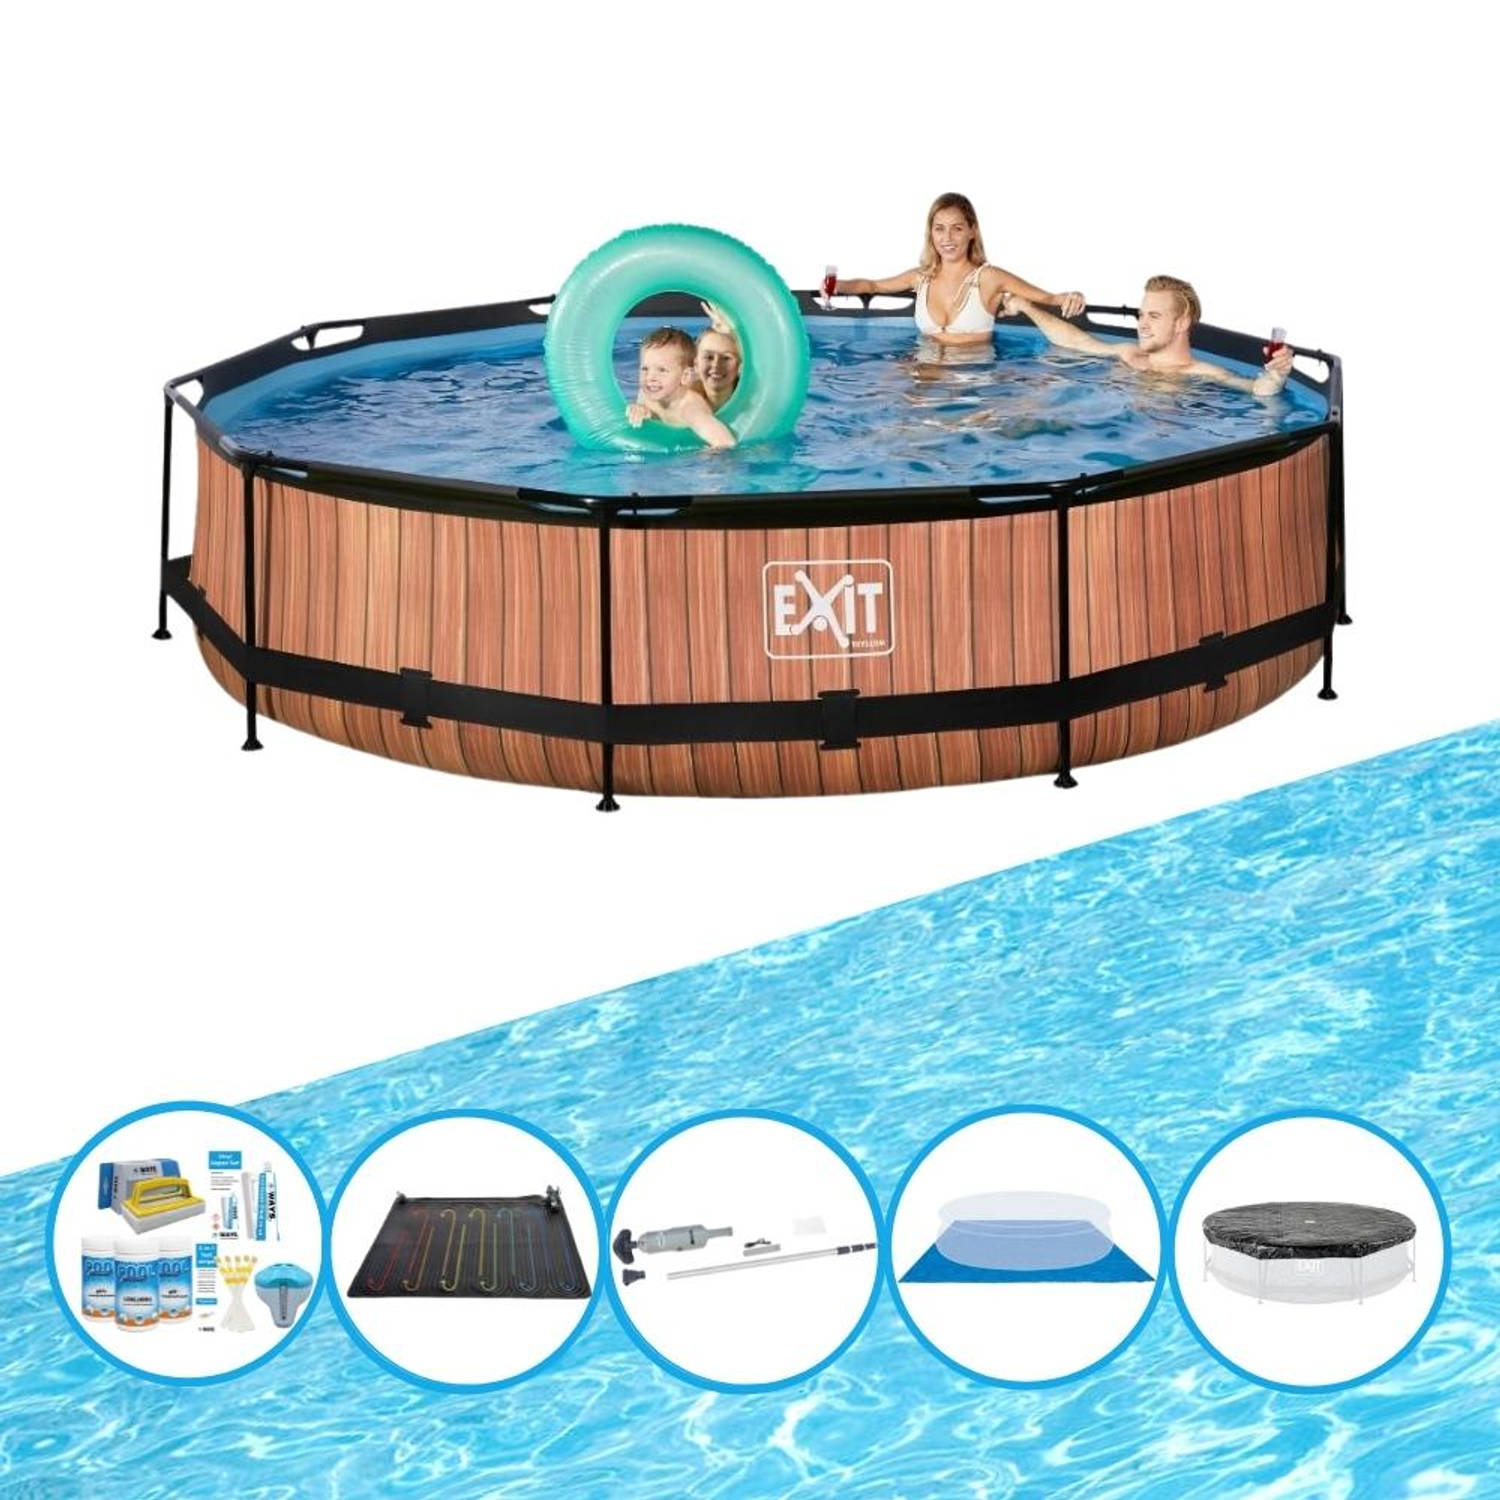 Exit Zwembad Timber Style Frame Pool ø360x76cm Met Accessoires